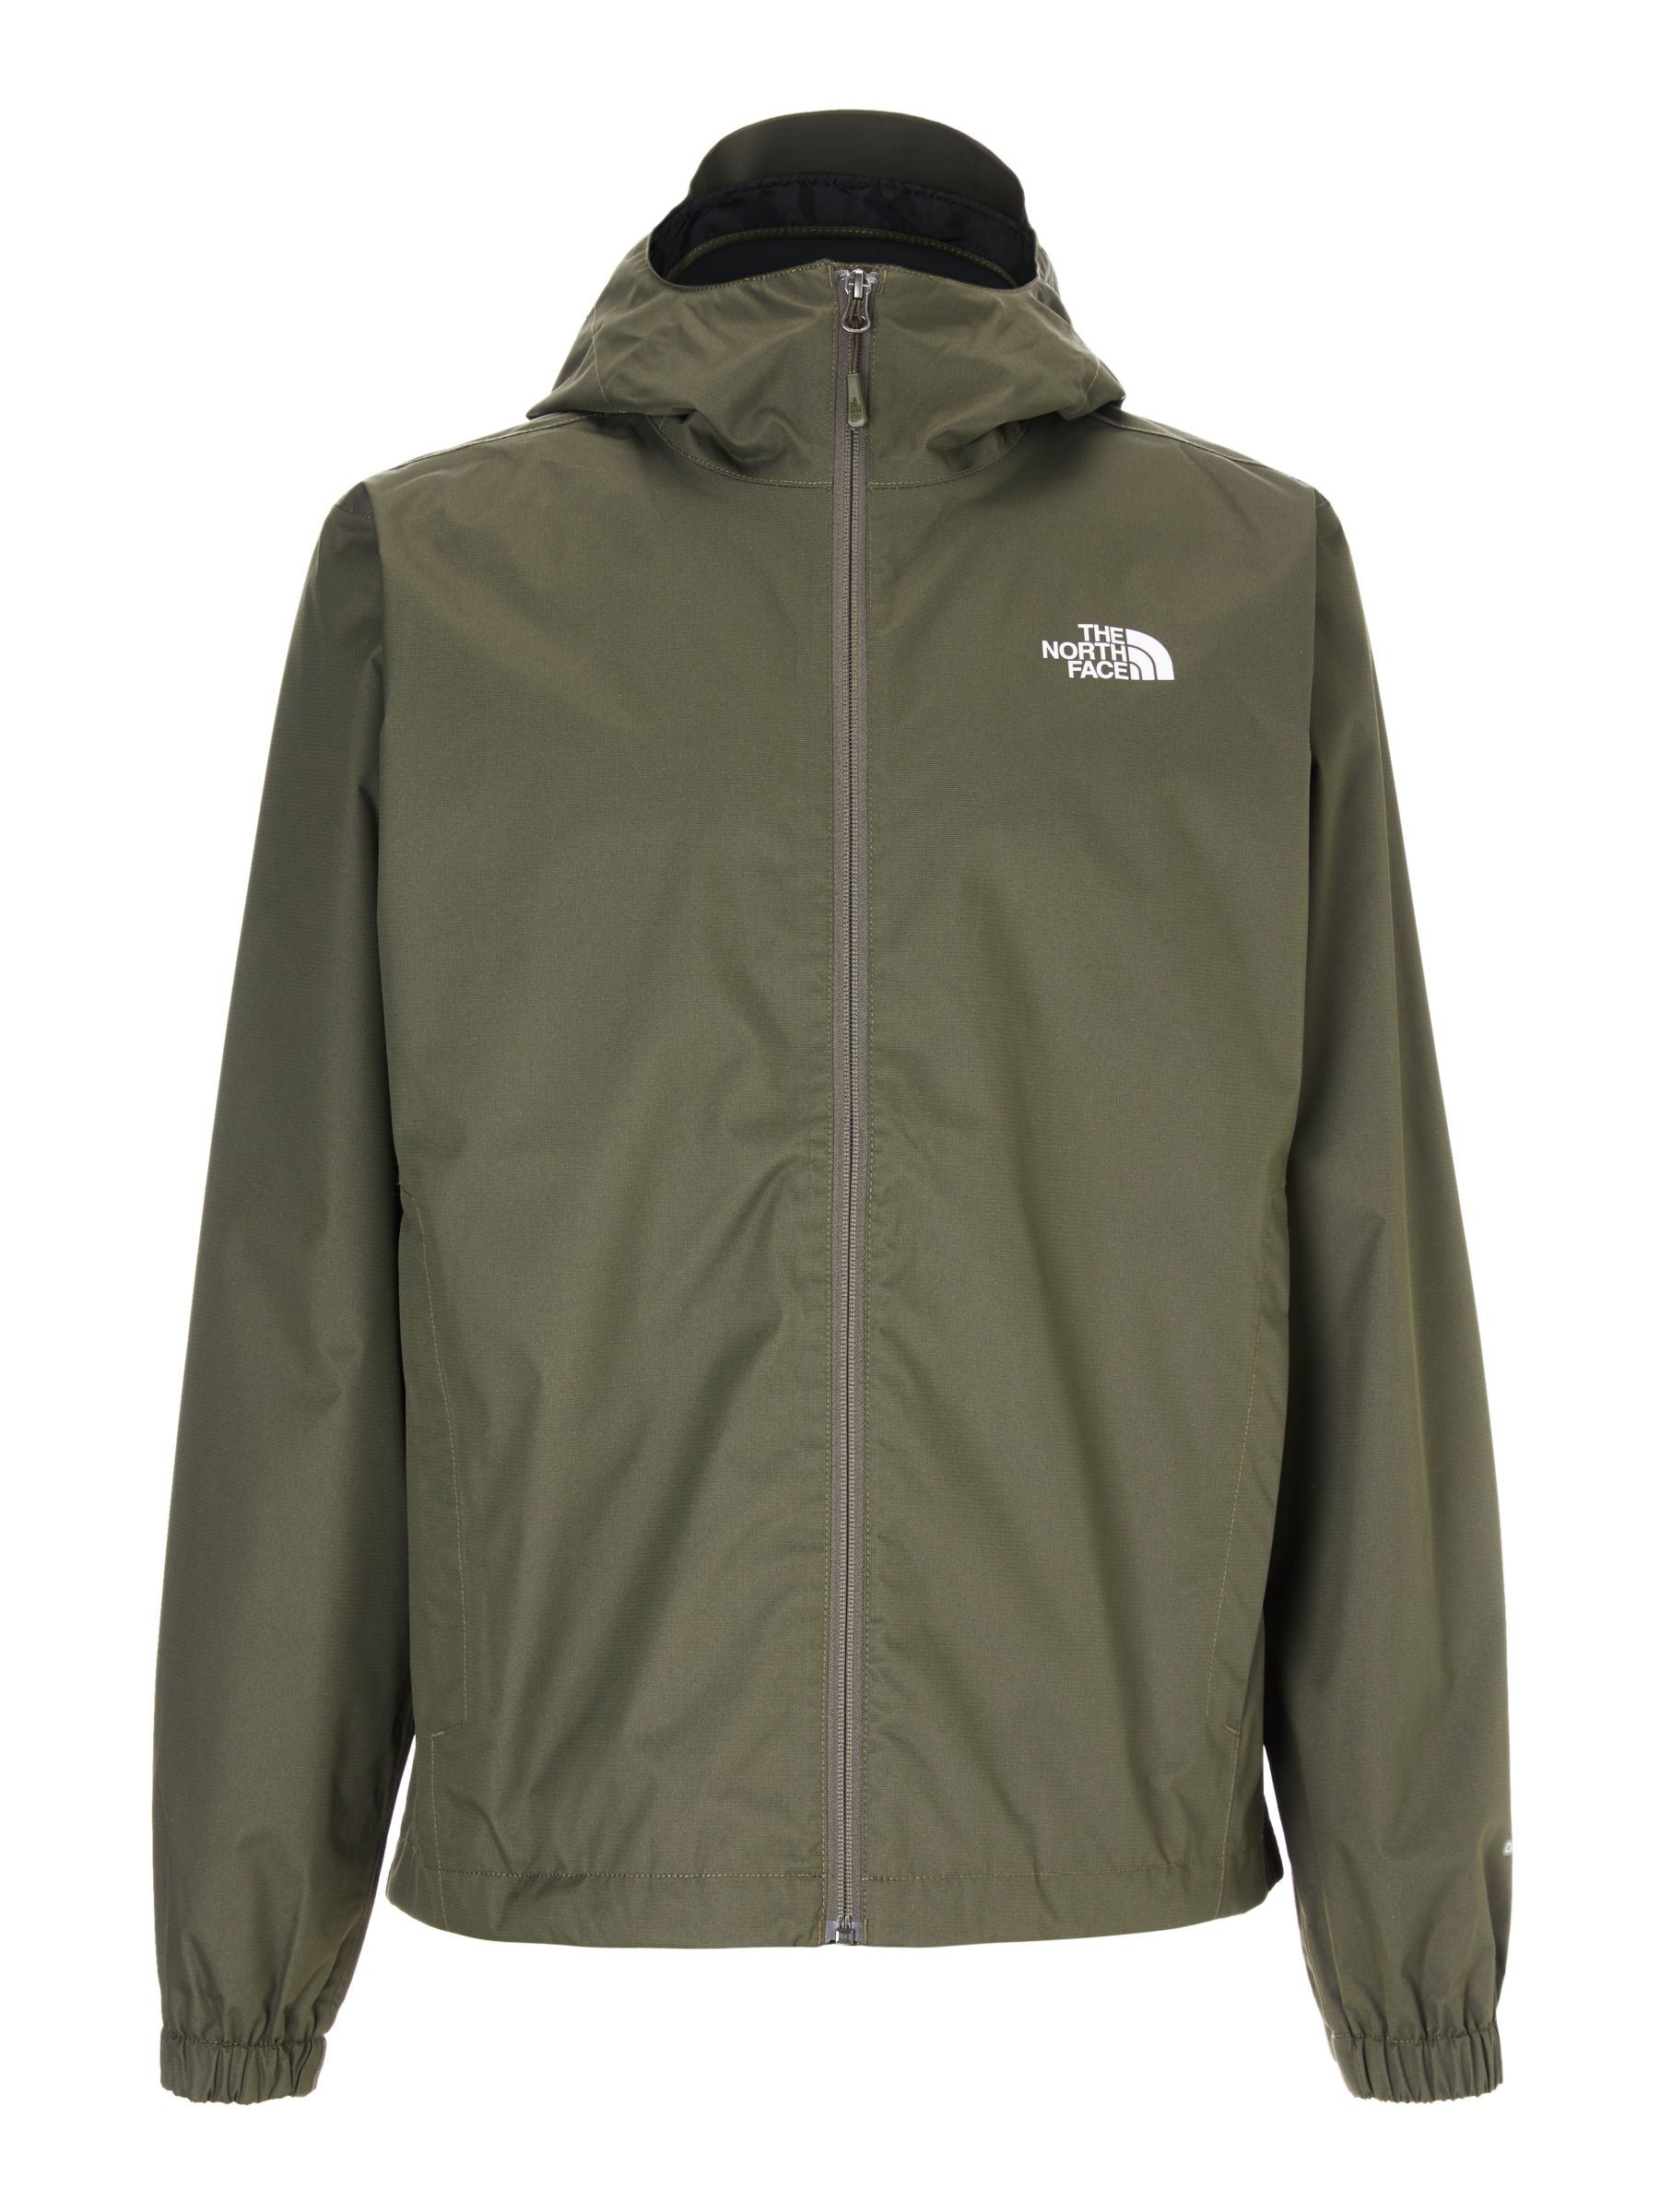 The North Face Quest Waterproof Men's 